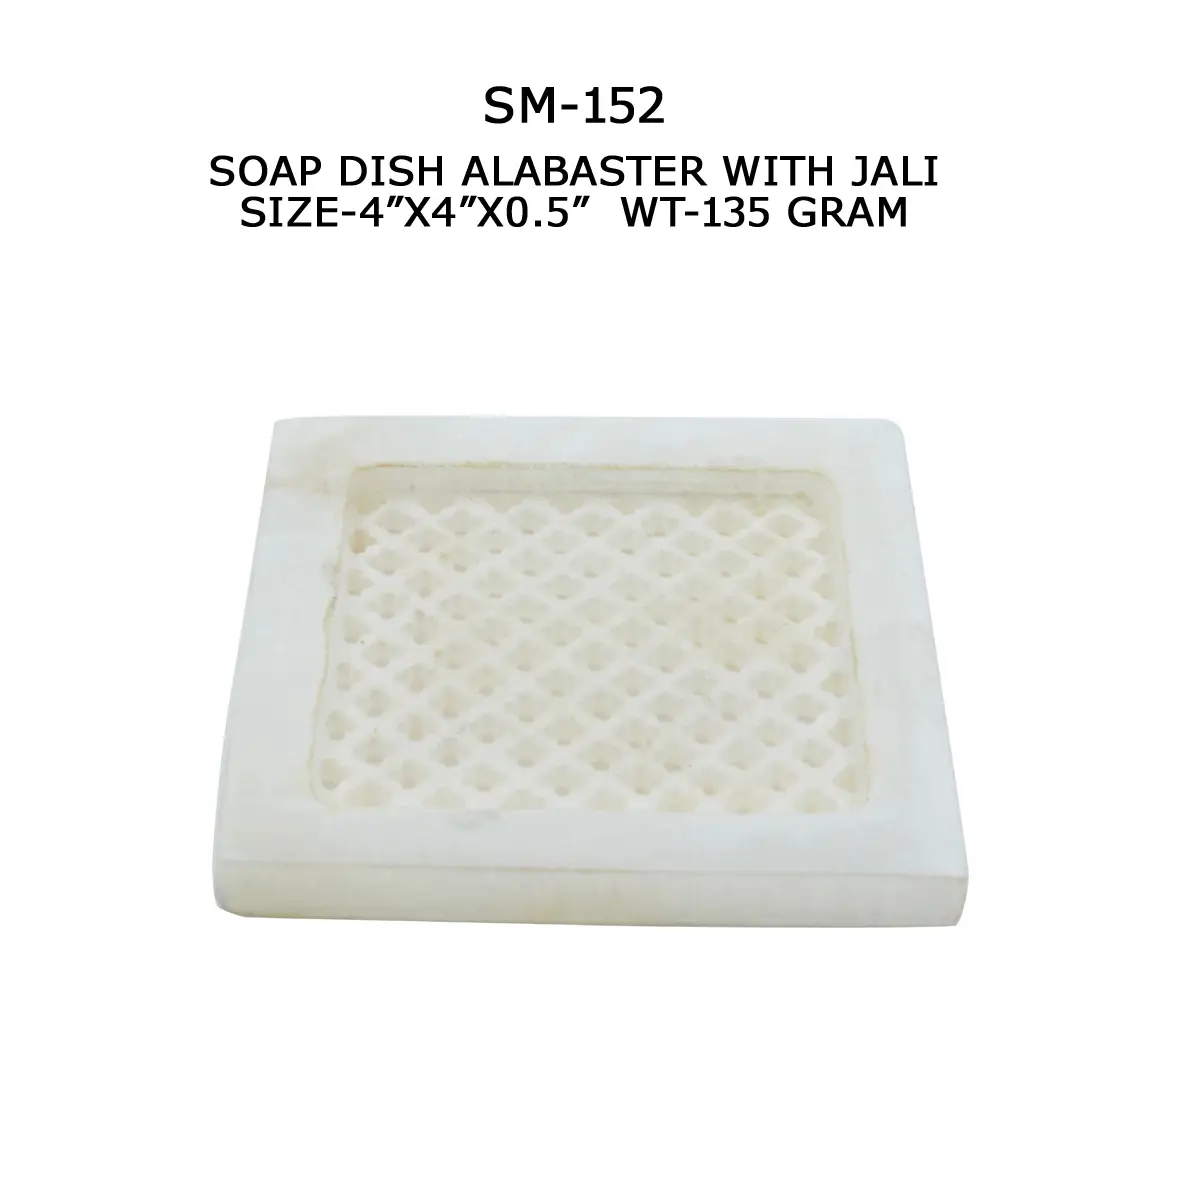 SOAP DISH ALABASTER WITH JALI